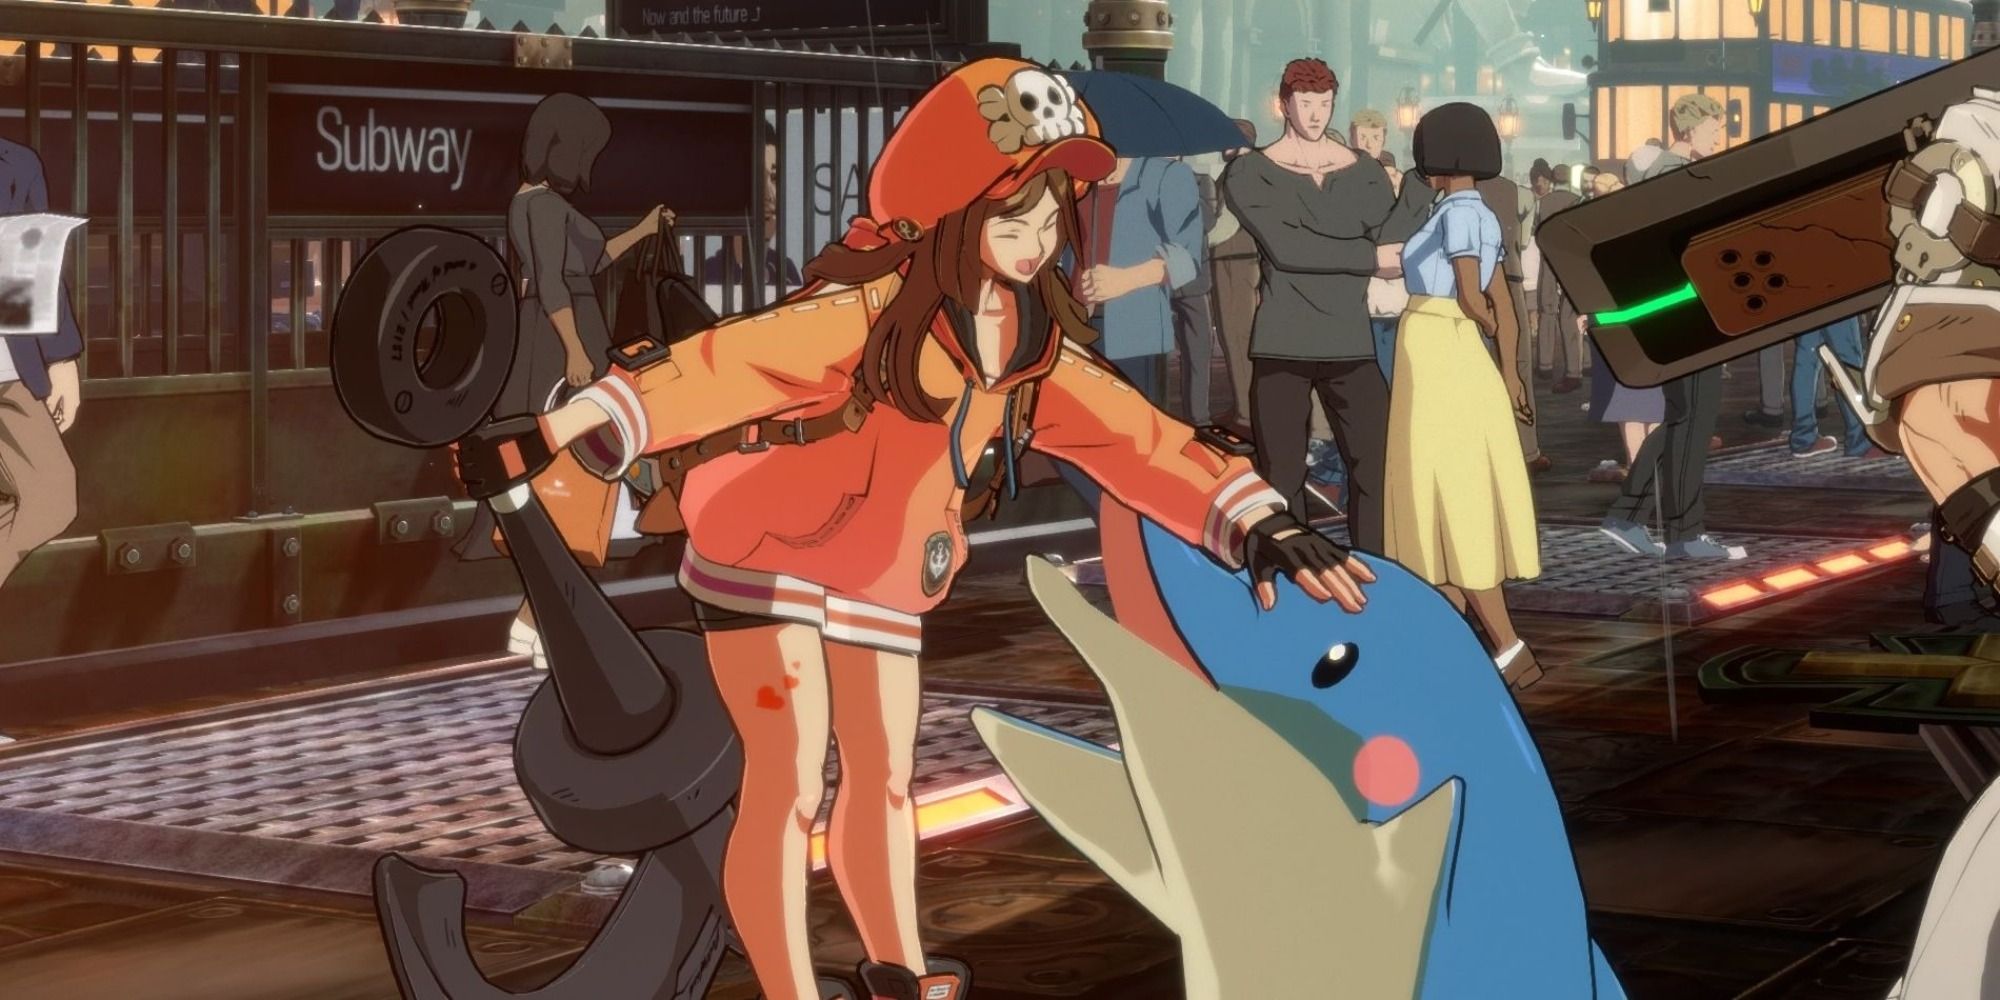 May petting Mr. Dolphin in Guilty Gear Strive